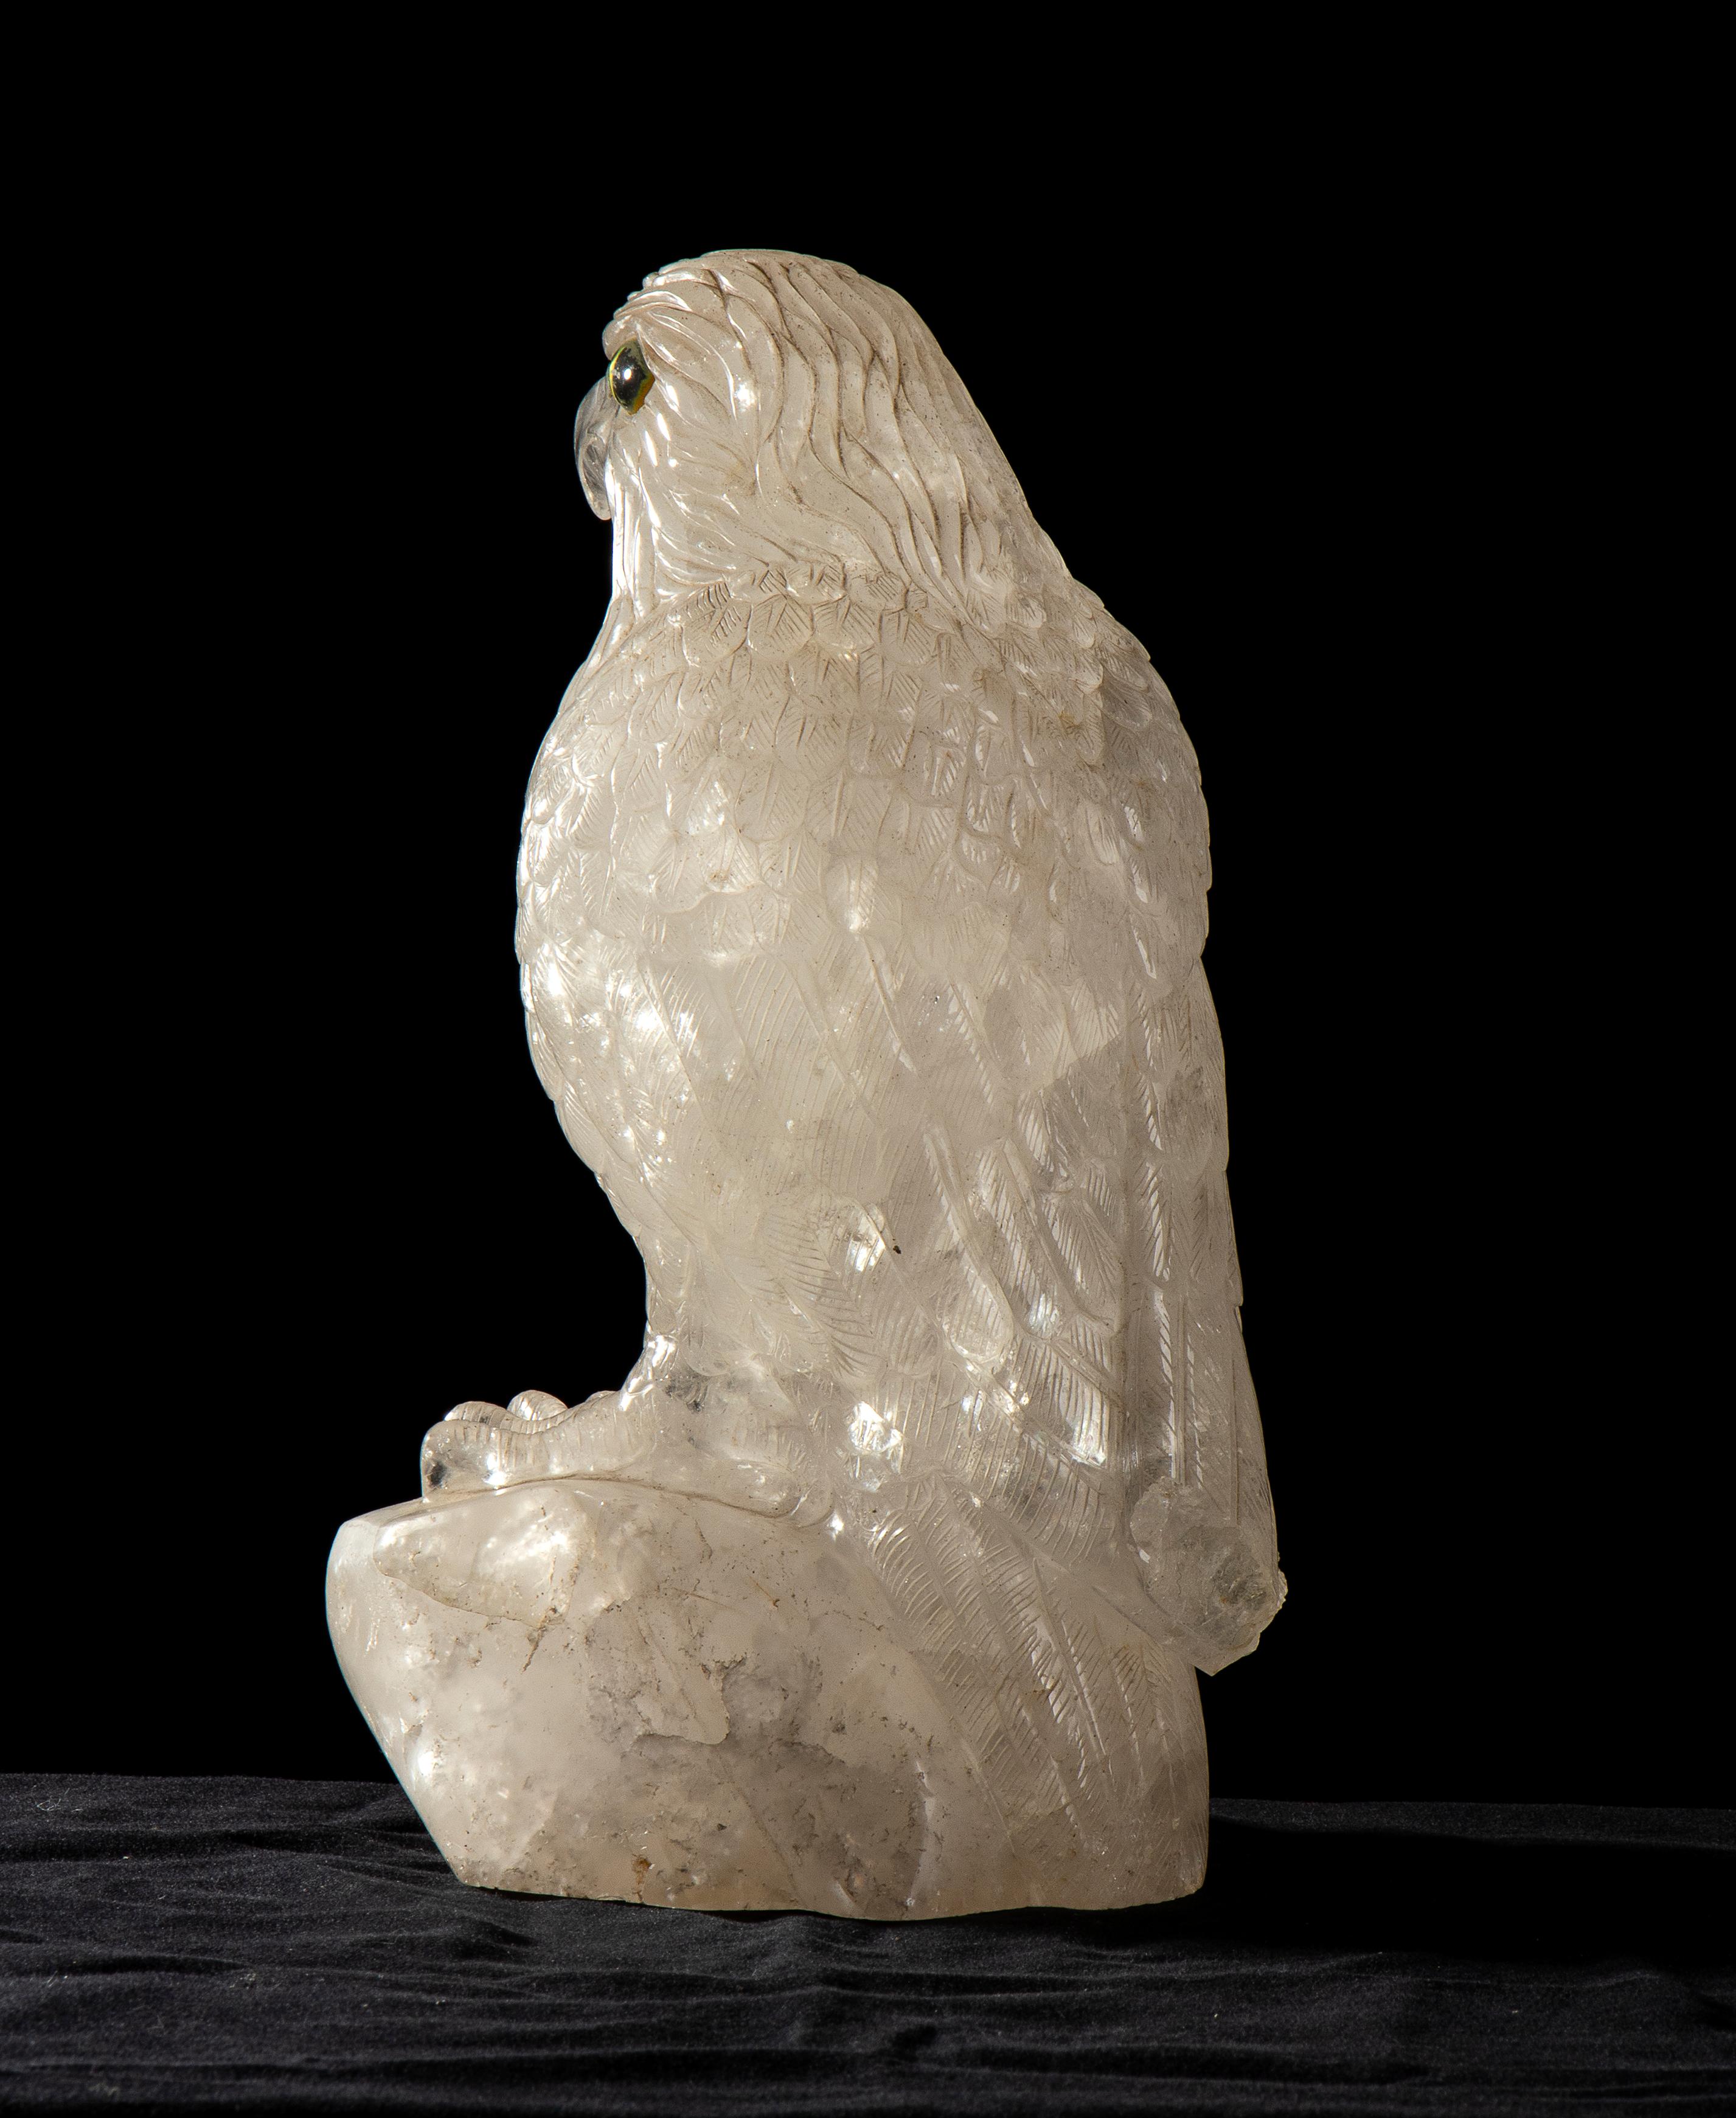 Sculpture of Eagle Carved From A Block Of Rock Crystal White Quartz  3